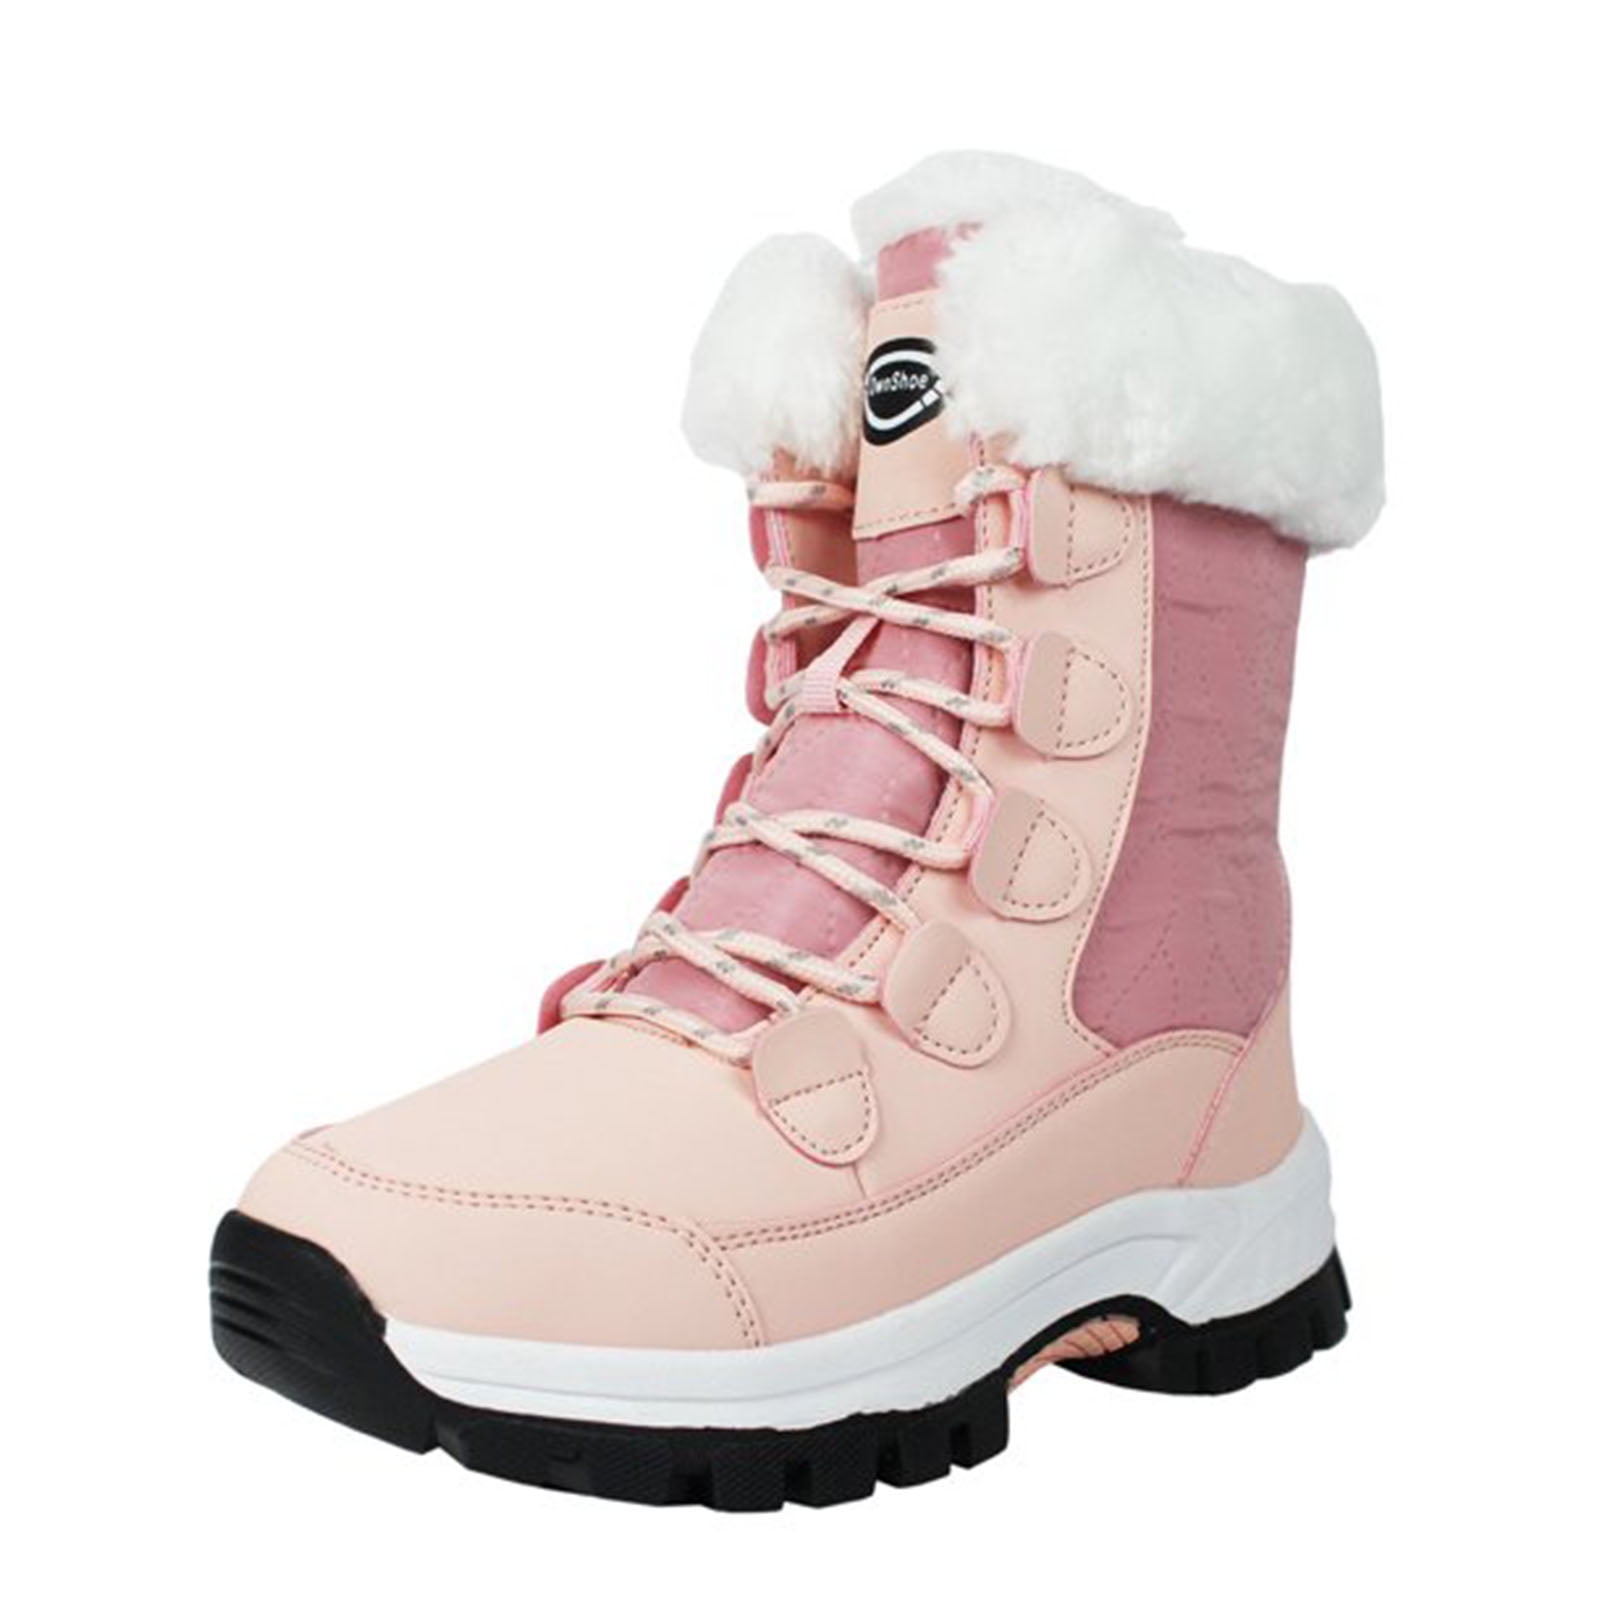 Kids Snow Boots Boys Girls Walking Hiking Cosy Winter Fur Lined Warm Shoes Cold Weather Outdoor Non-Slip High Top Boot Waterproof 